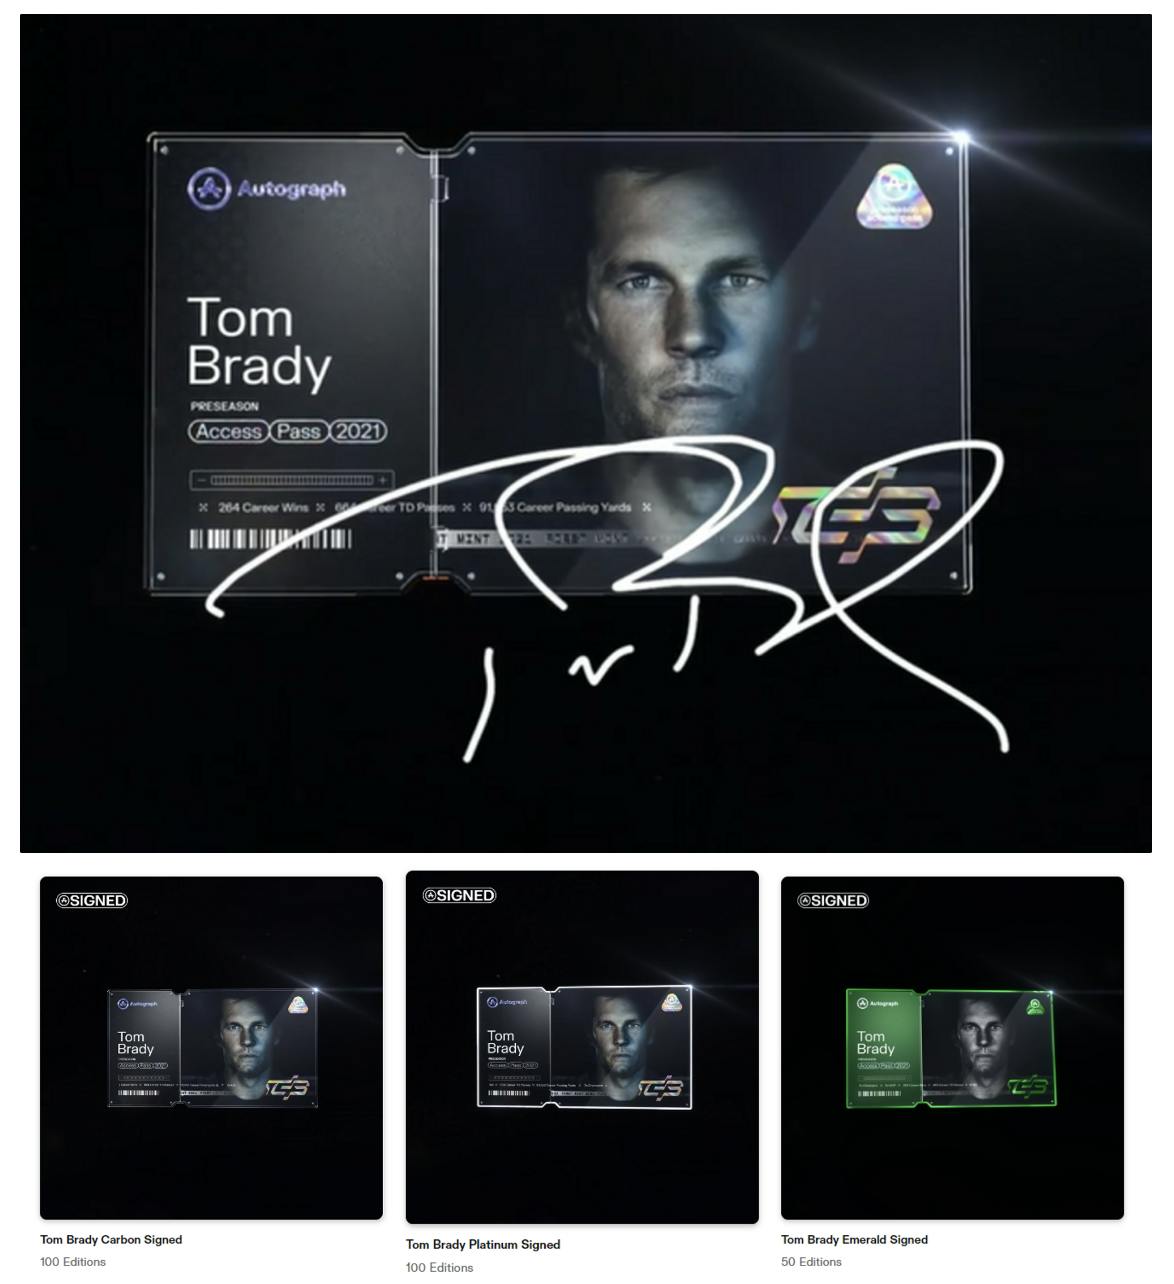 Tom Brady launches his own NFT platform, Autograph, where celebrities can  sell digital collectibles